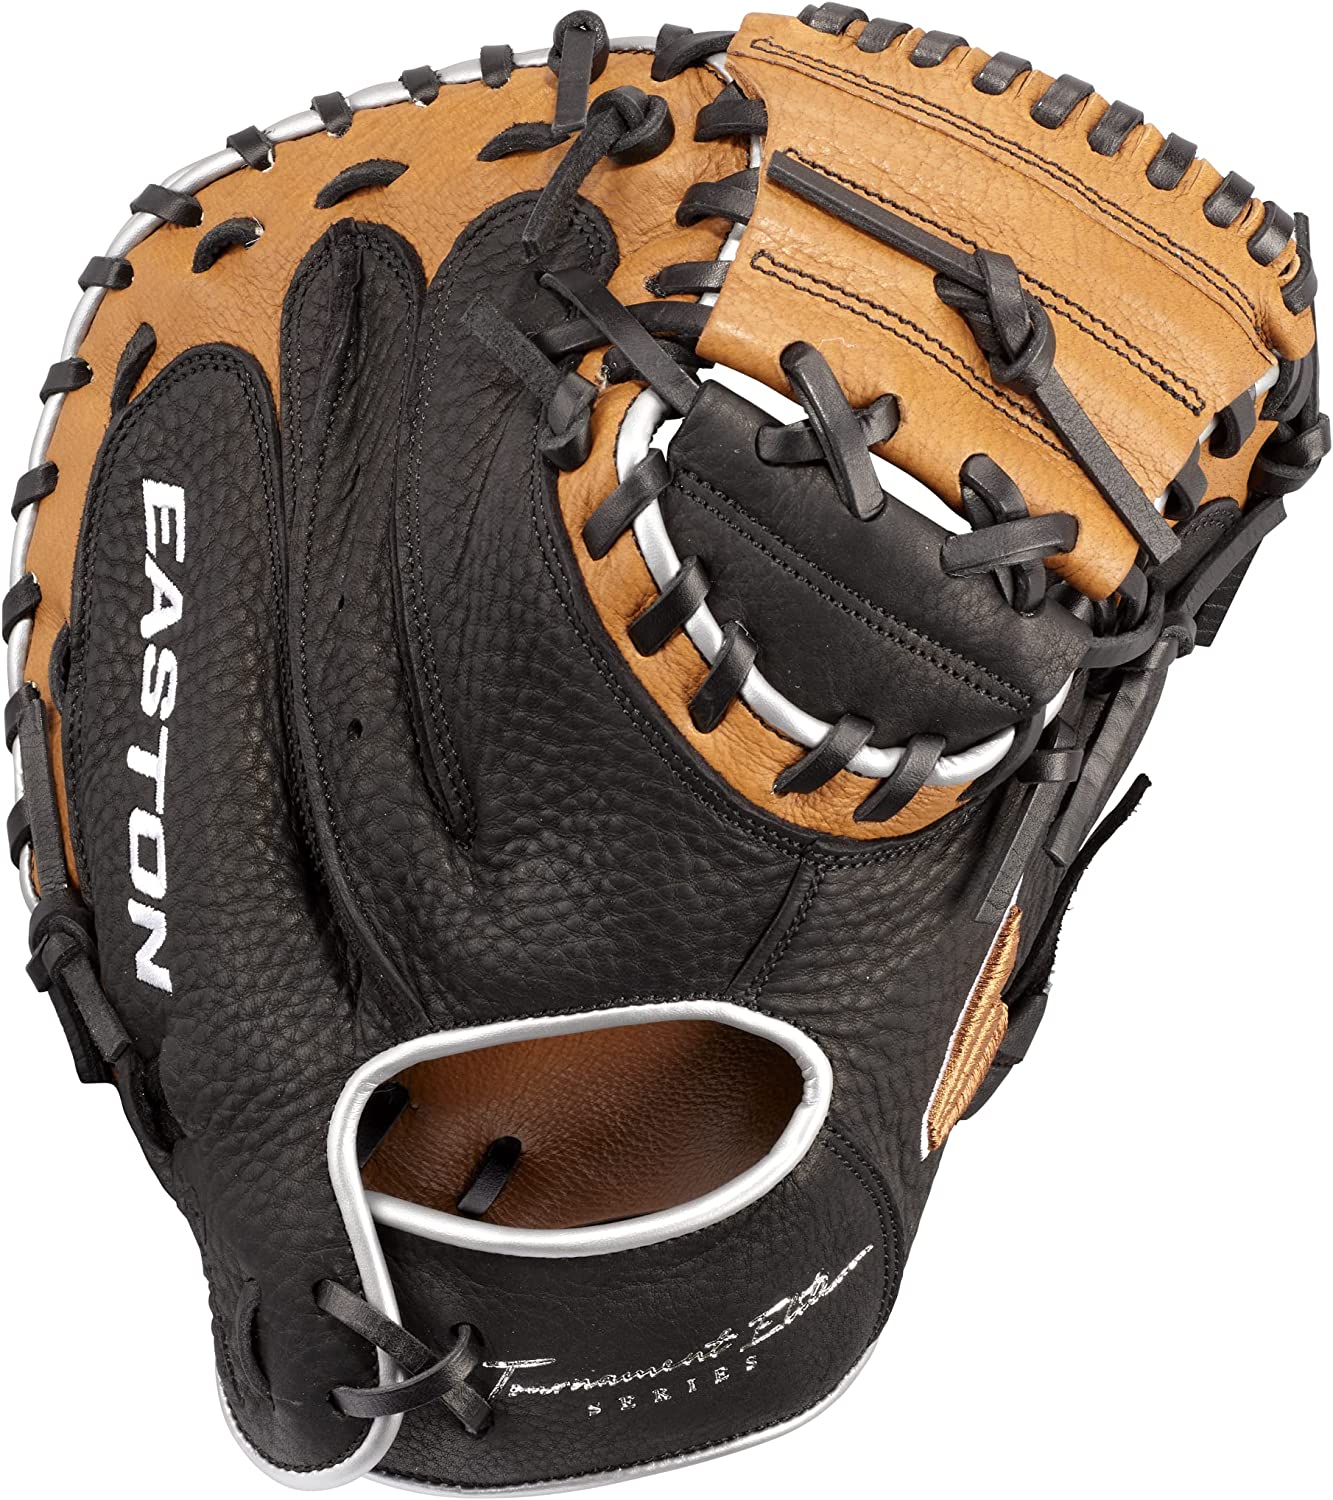 Easton Realtree HS7 Batting Gloves (Available in Adult & Youth)